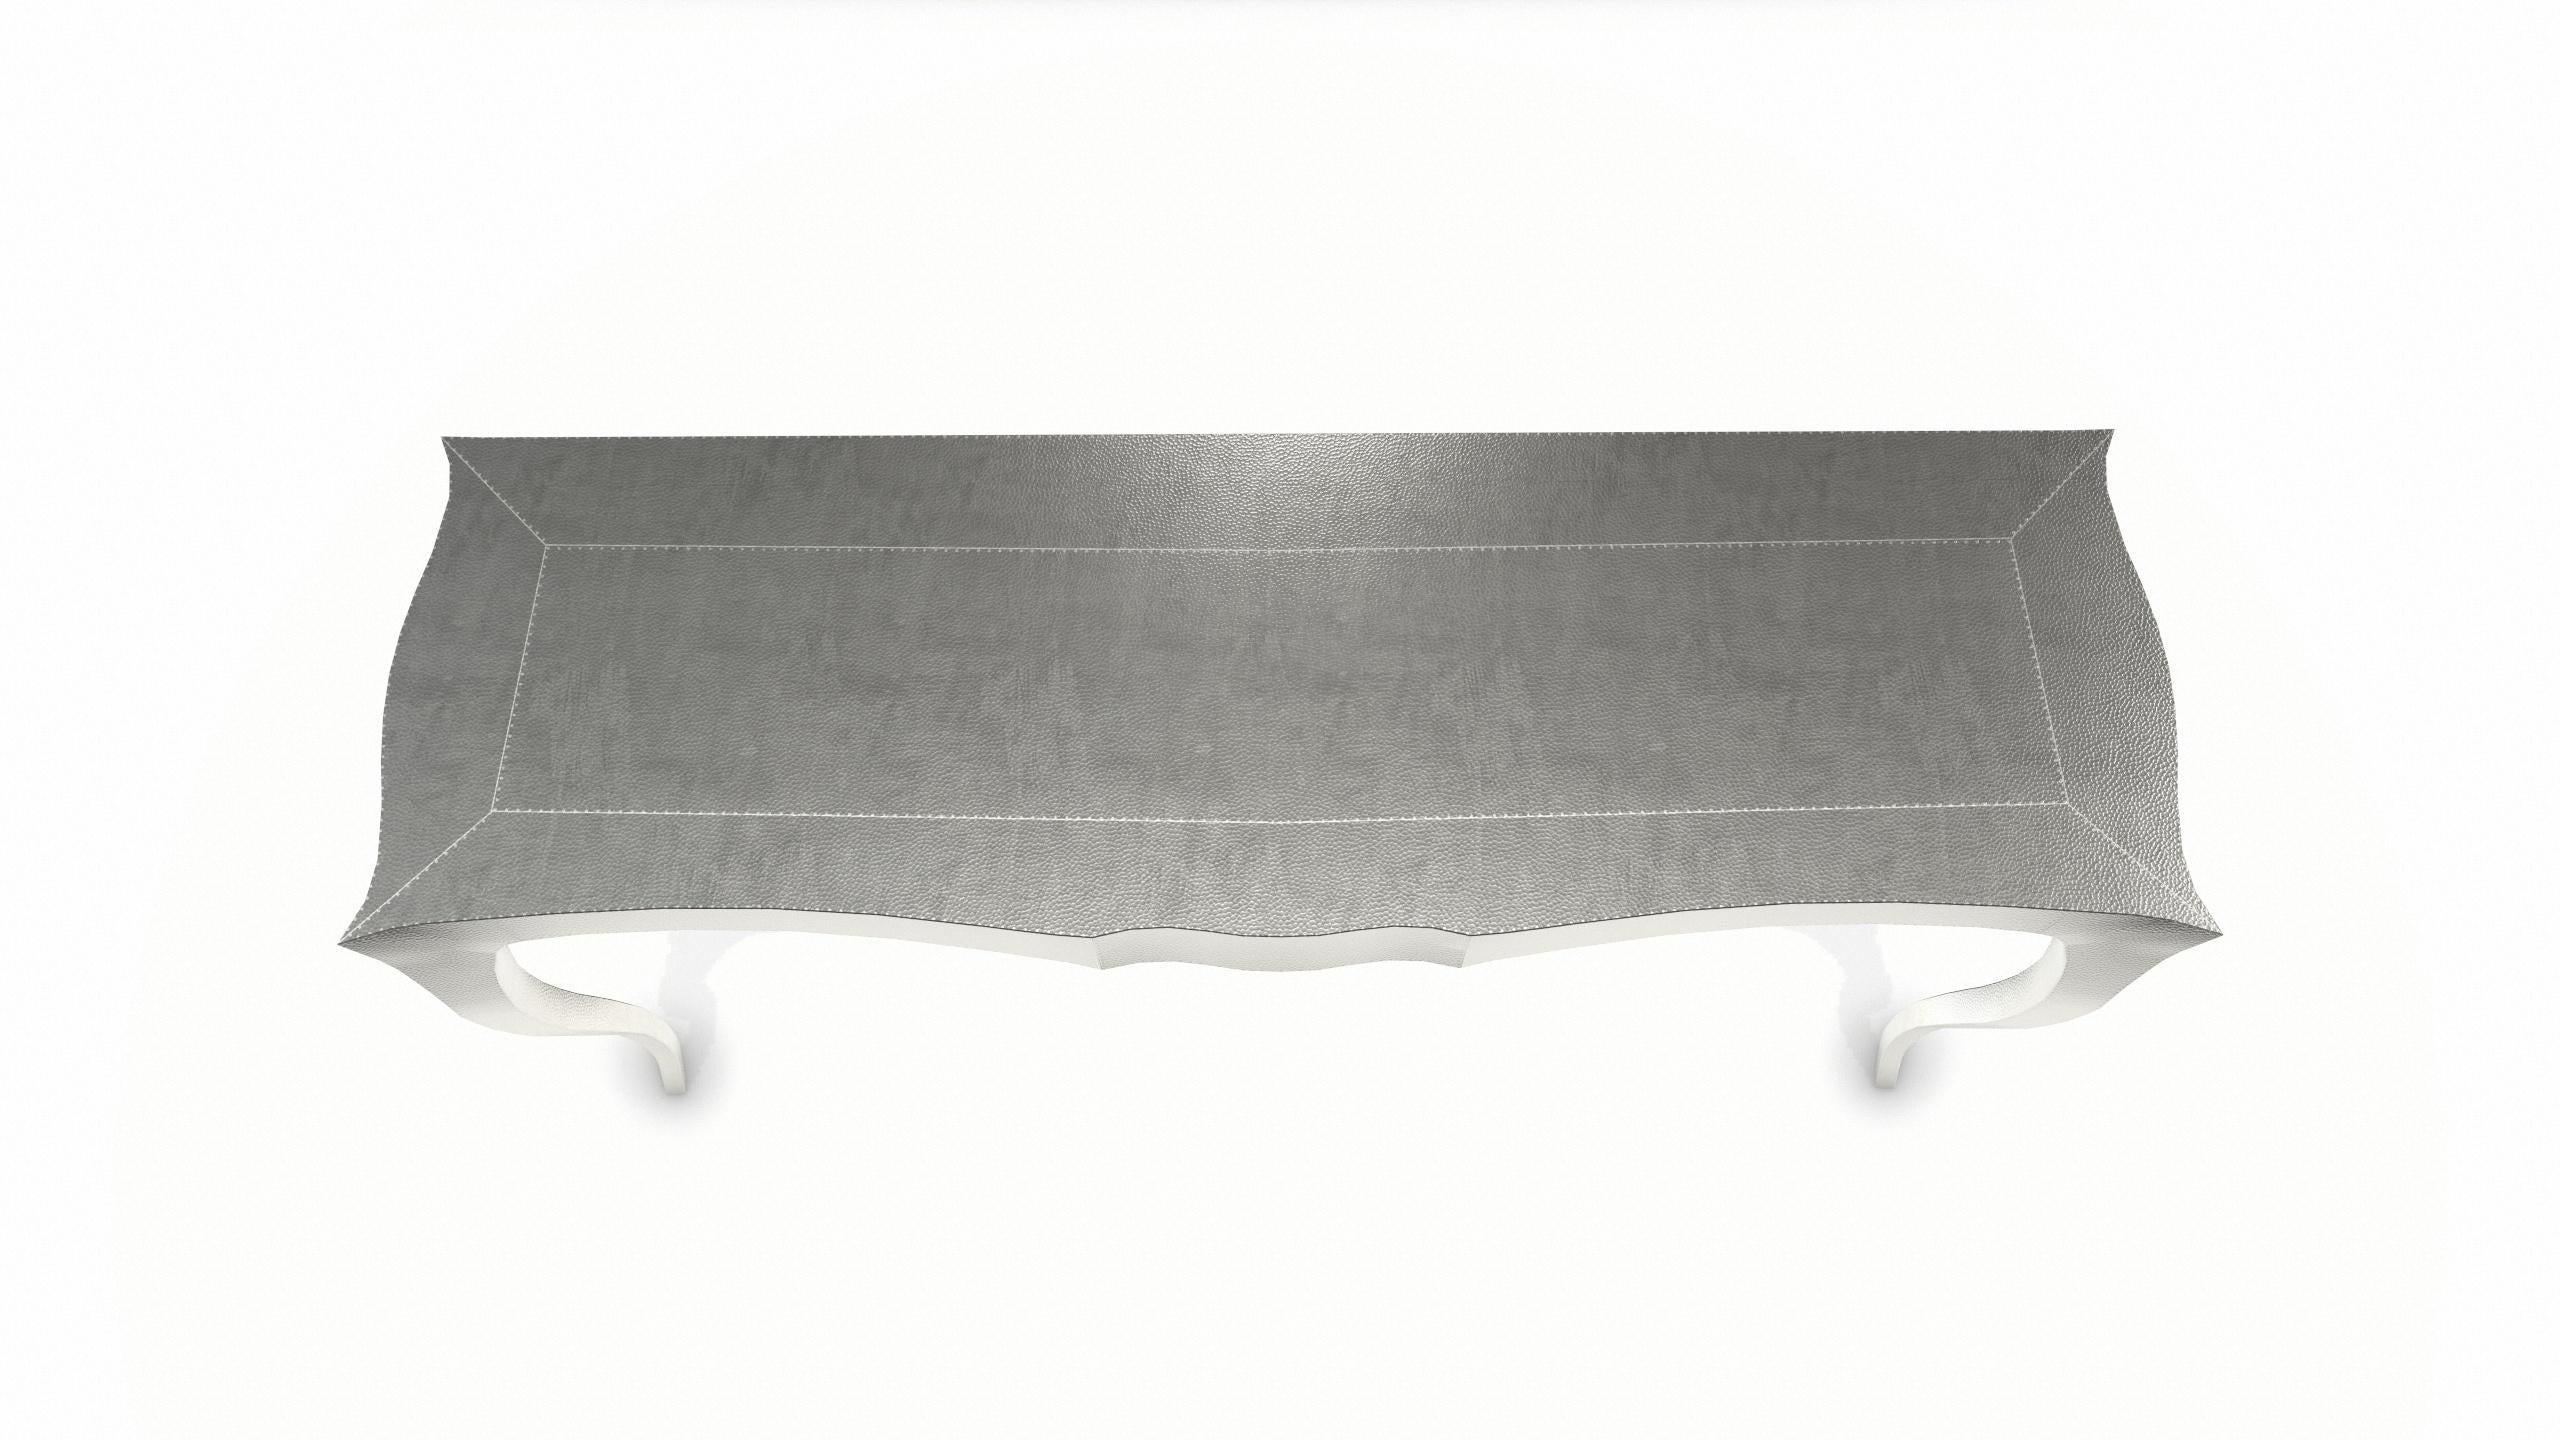 Metal Louise Console Art Deco Nesting and Stacking Tables Mid. Hammered White Bronze For Sale